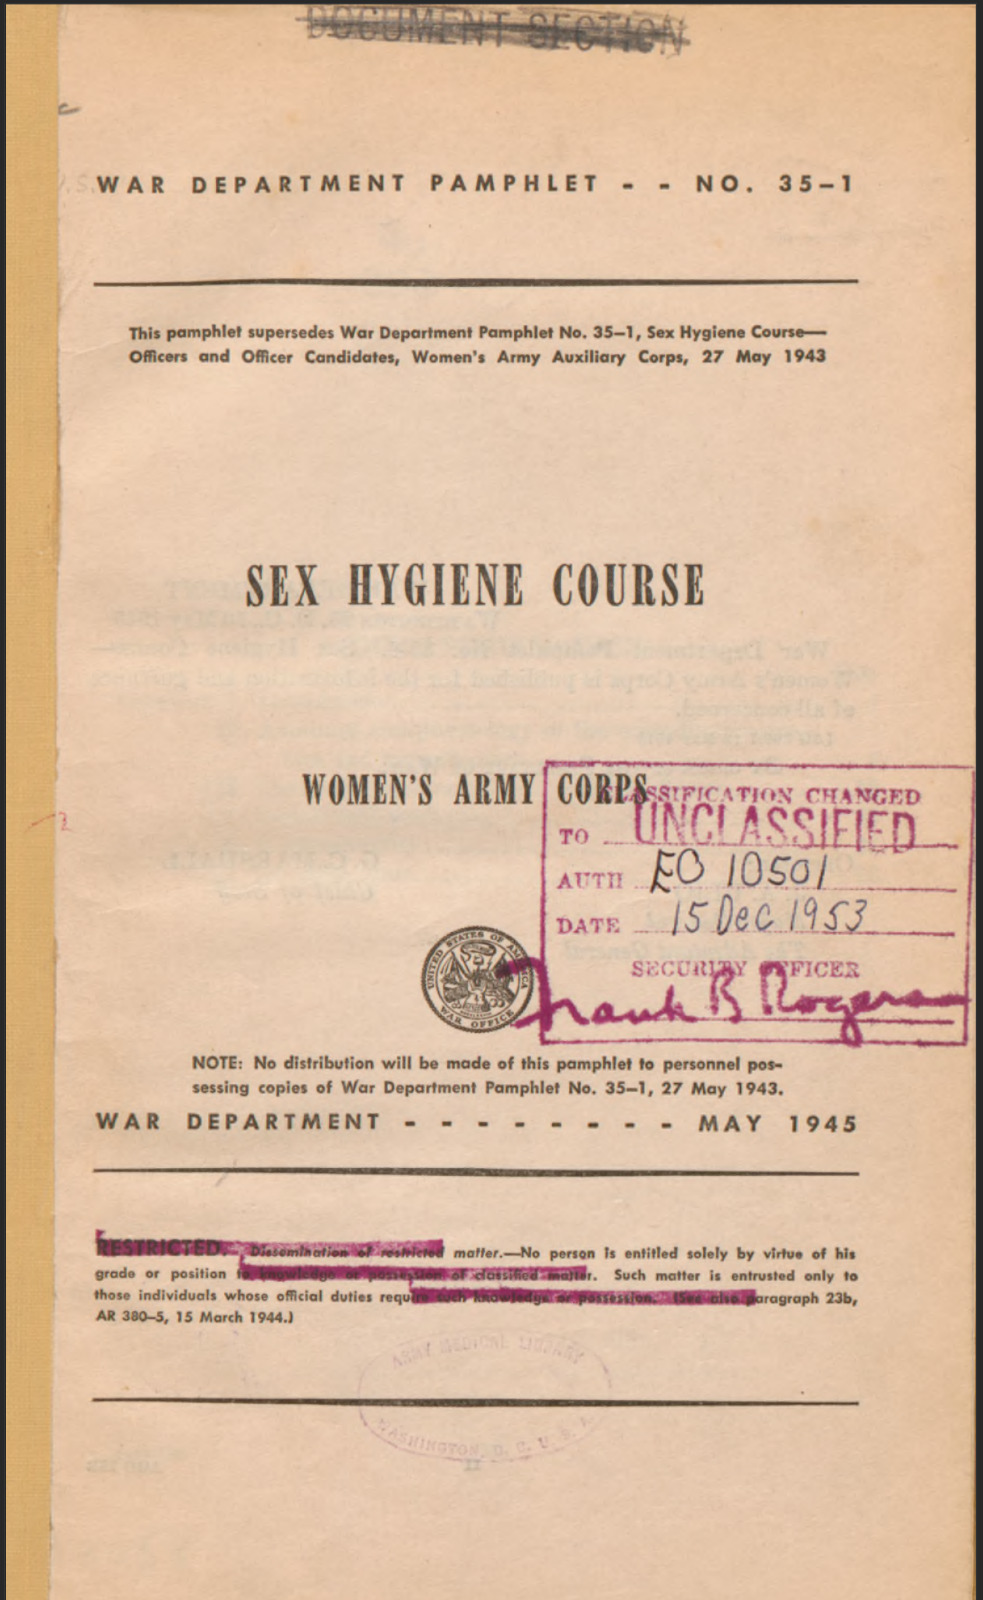 33 Page May 1945 Sex Hygiene Course: Women's Army Corps WAC Pamphlet On Data CD